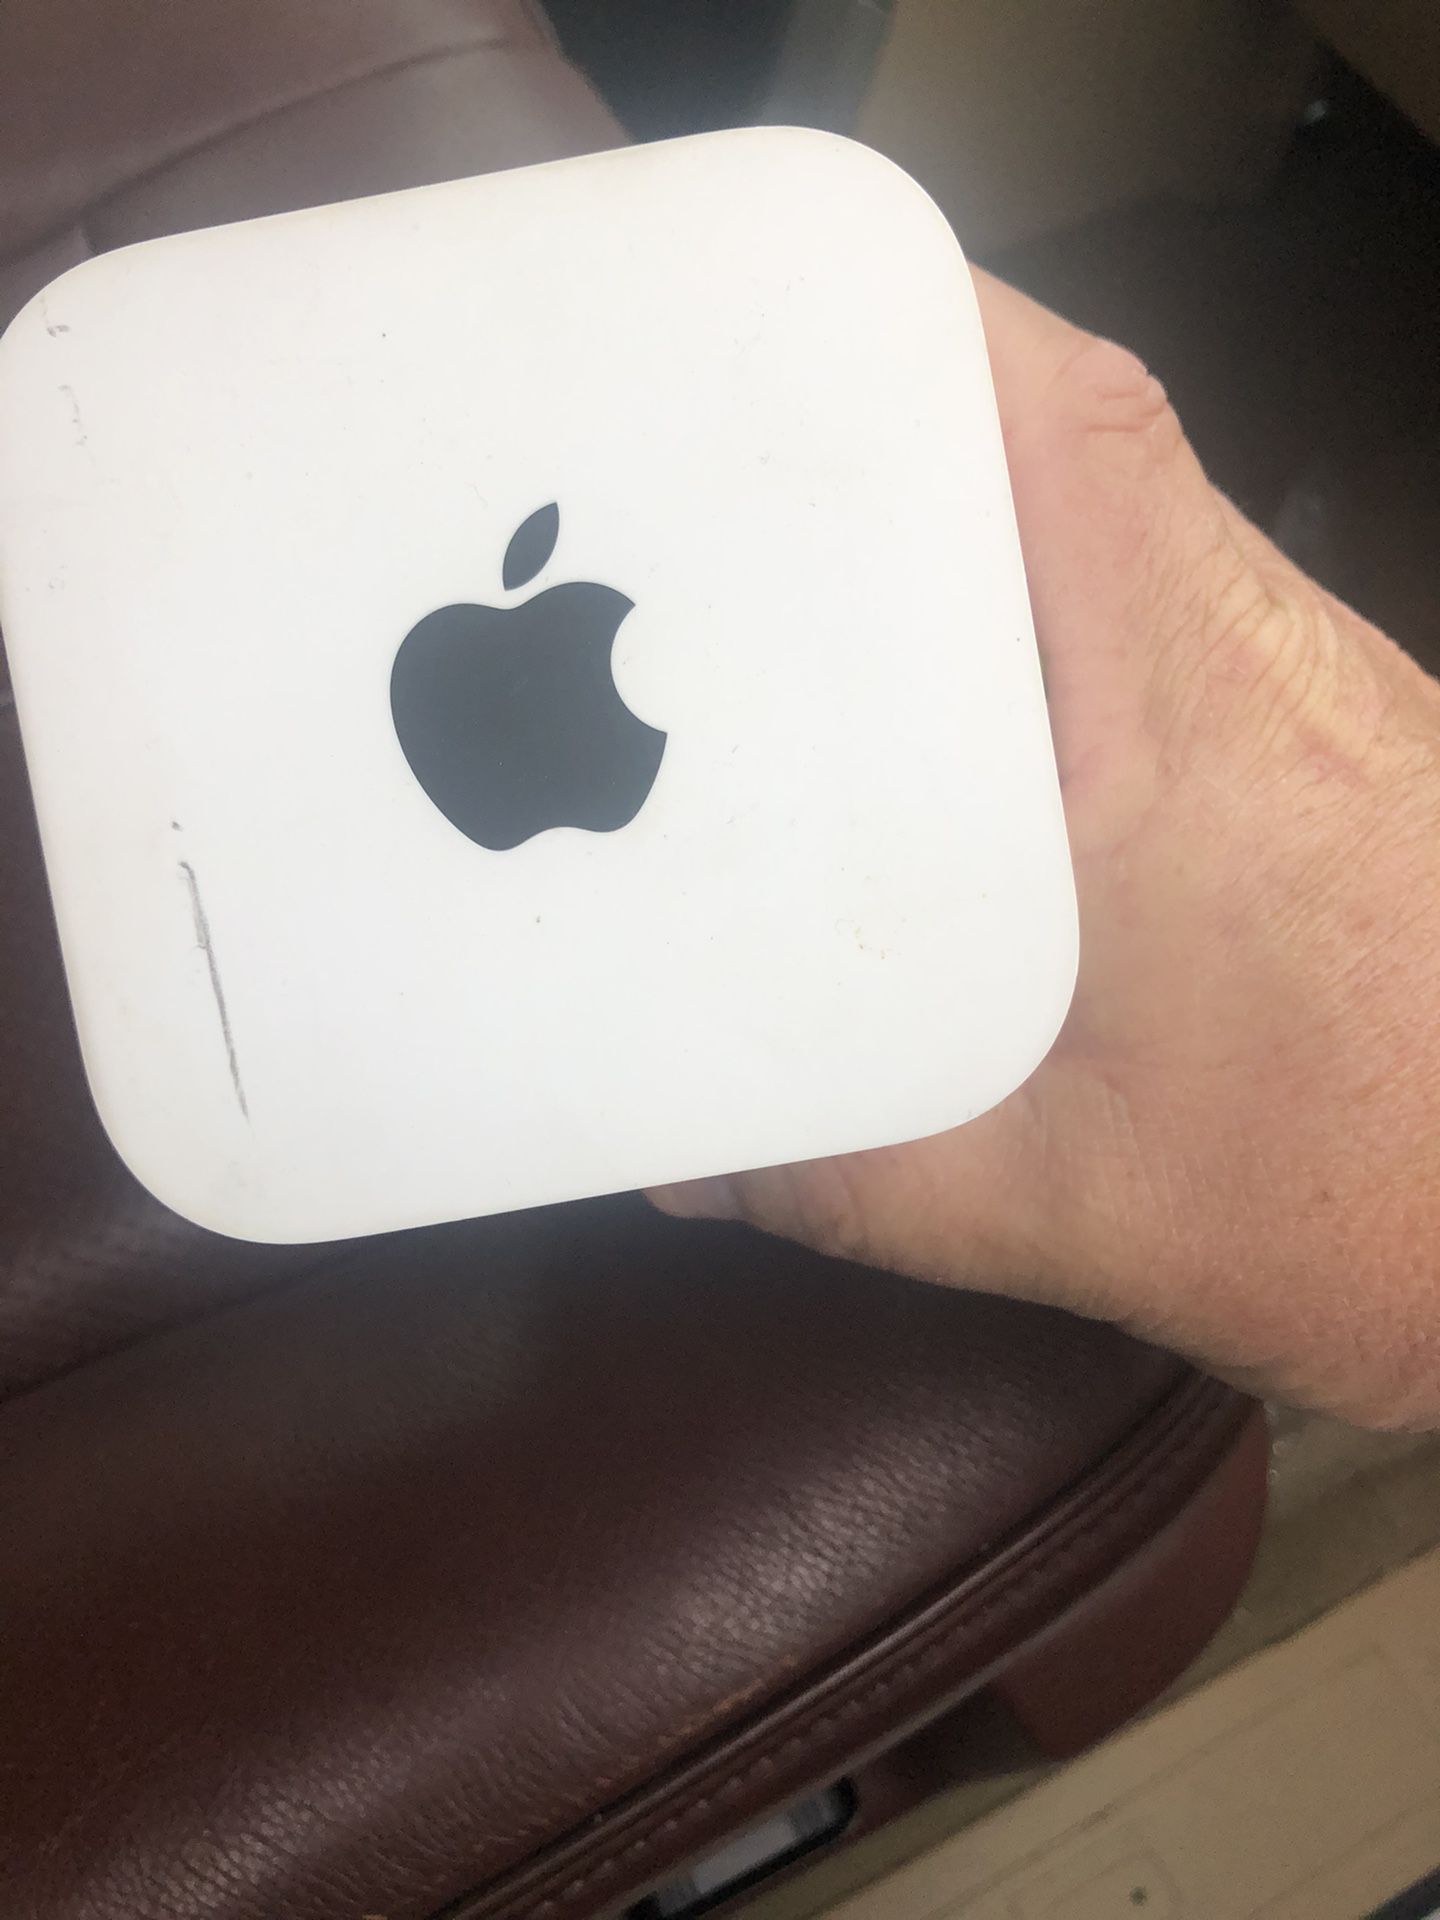 Apple AirPort Extreme router. Works great